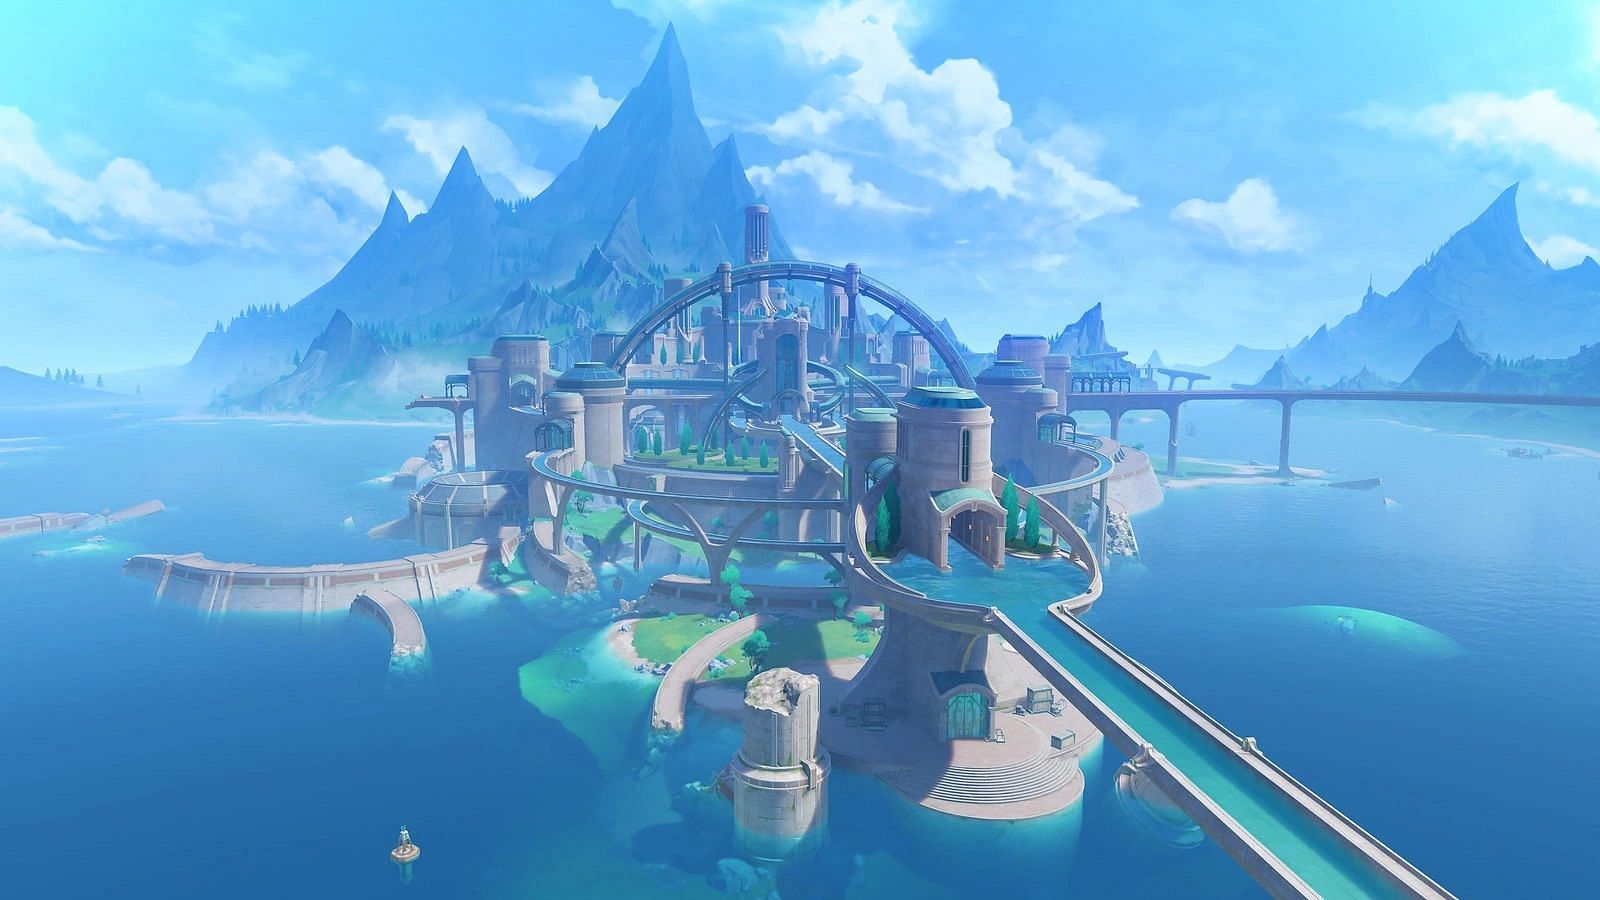 Fontaine as seen in-game (Image via HoYoverse)